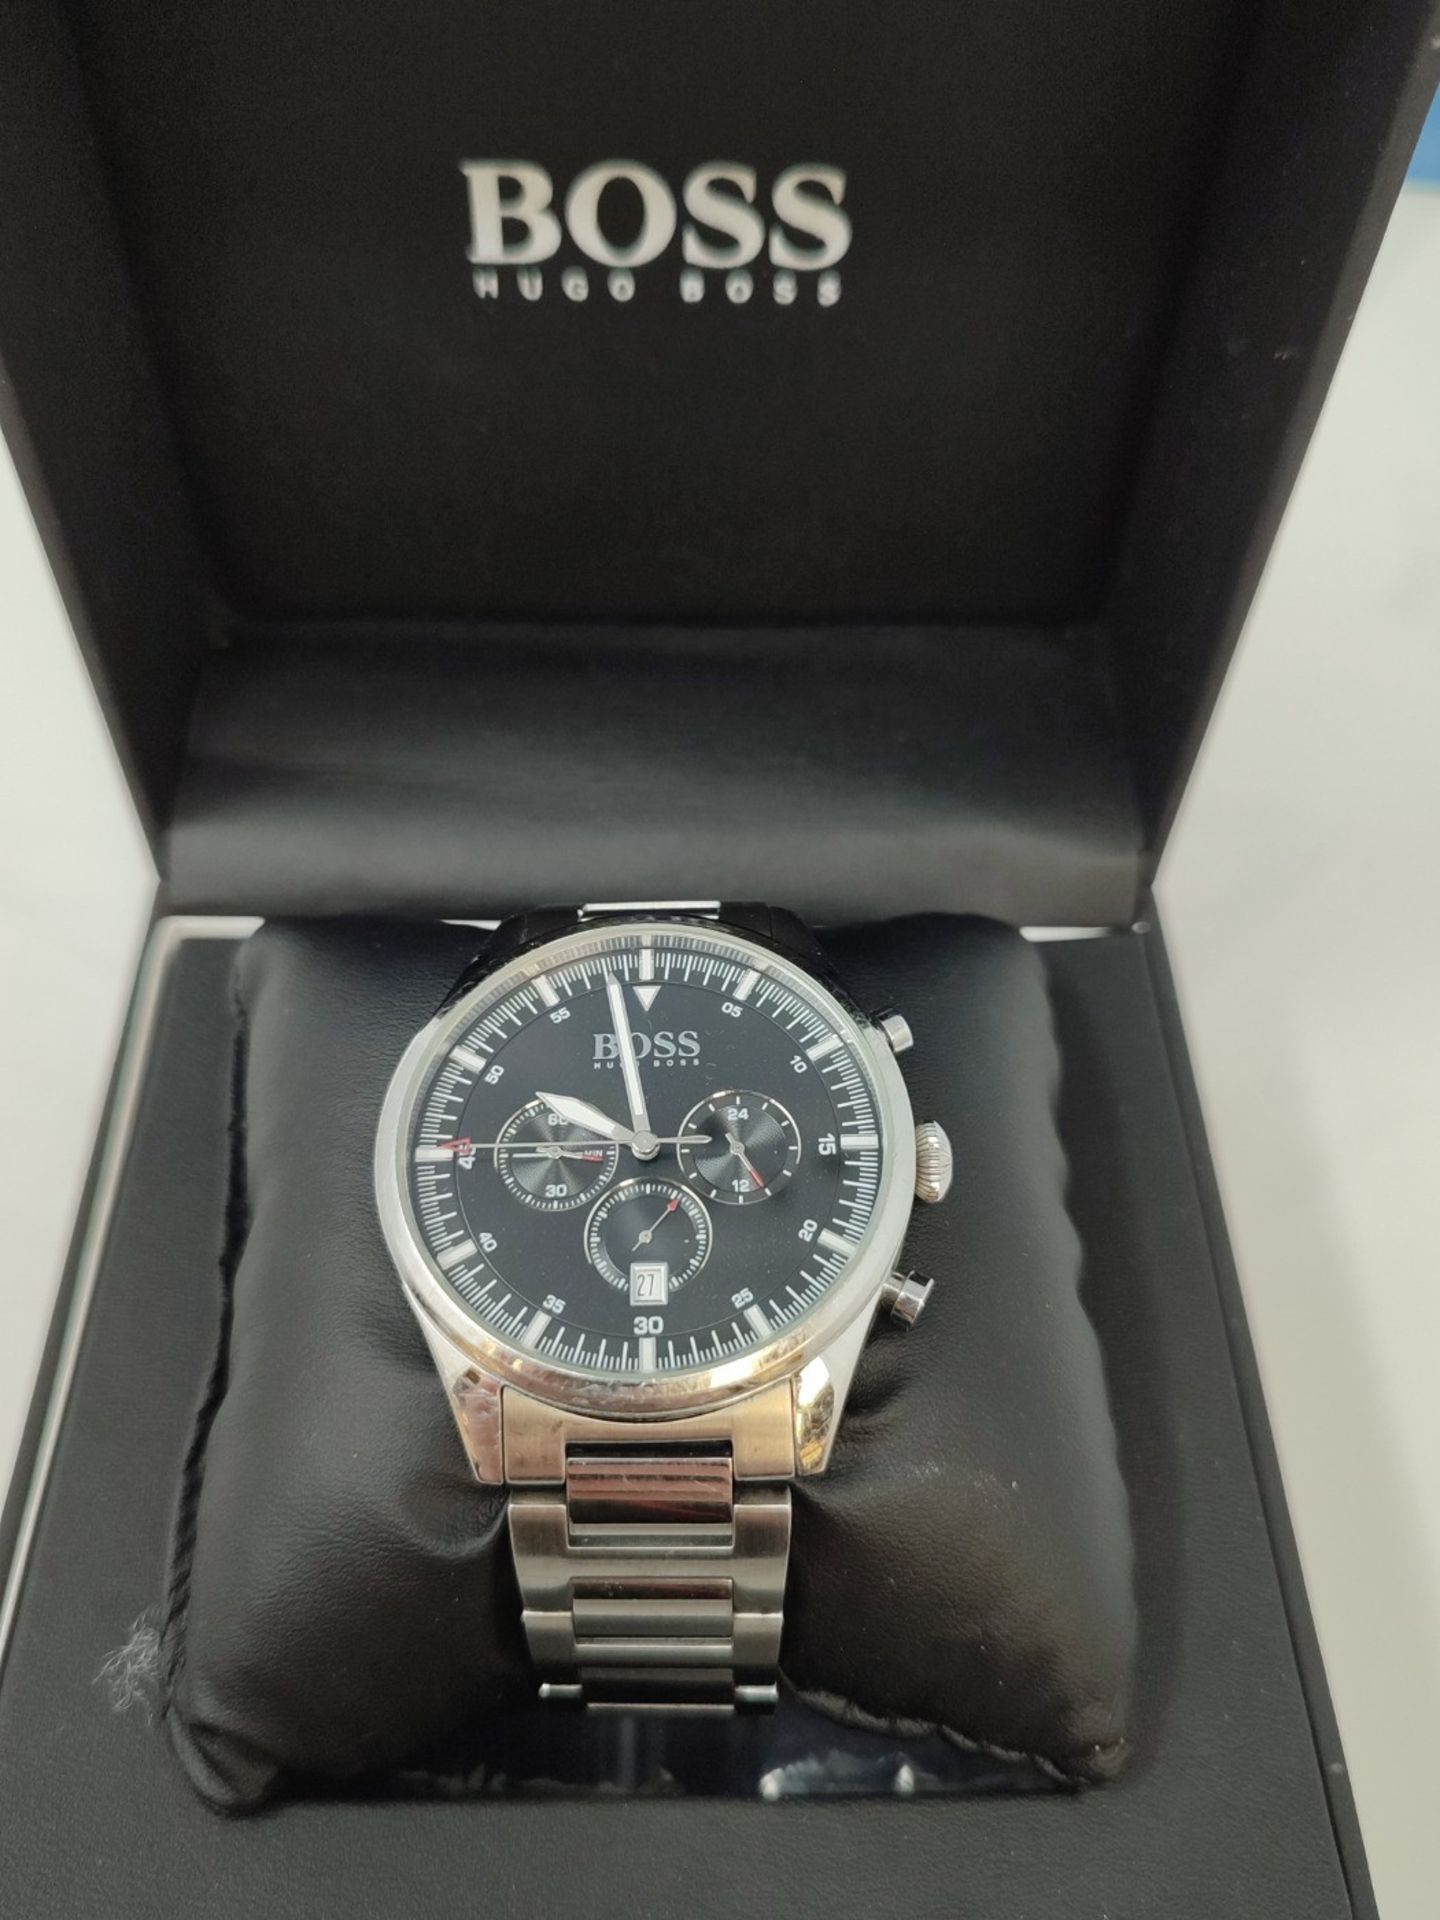 RRP £249.00 BOSS Chronograph Quartz Watch for Men with Silver Stainless Steel Bracelet - 1513712 - Image 2 of 3